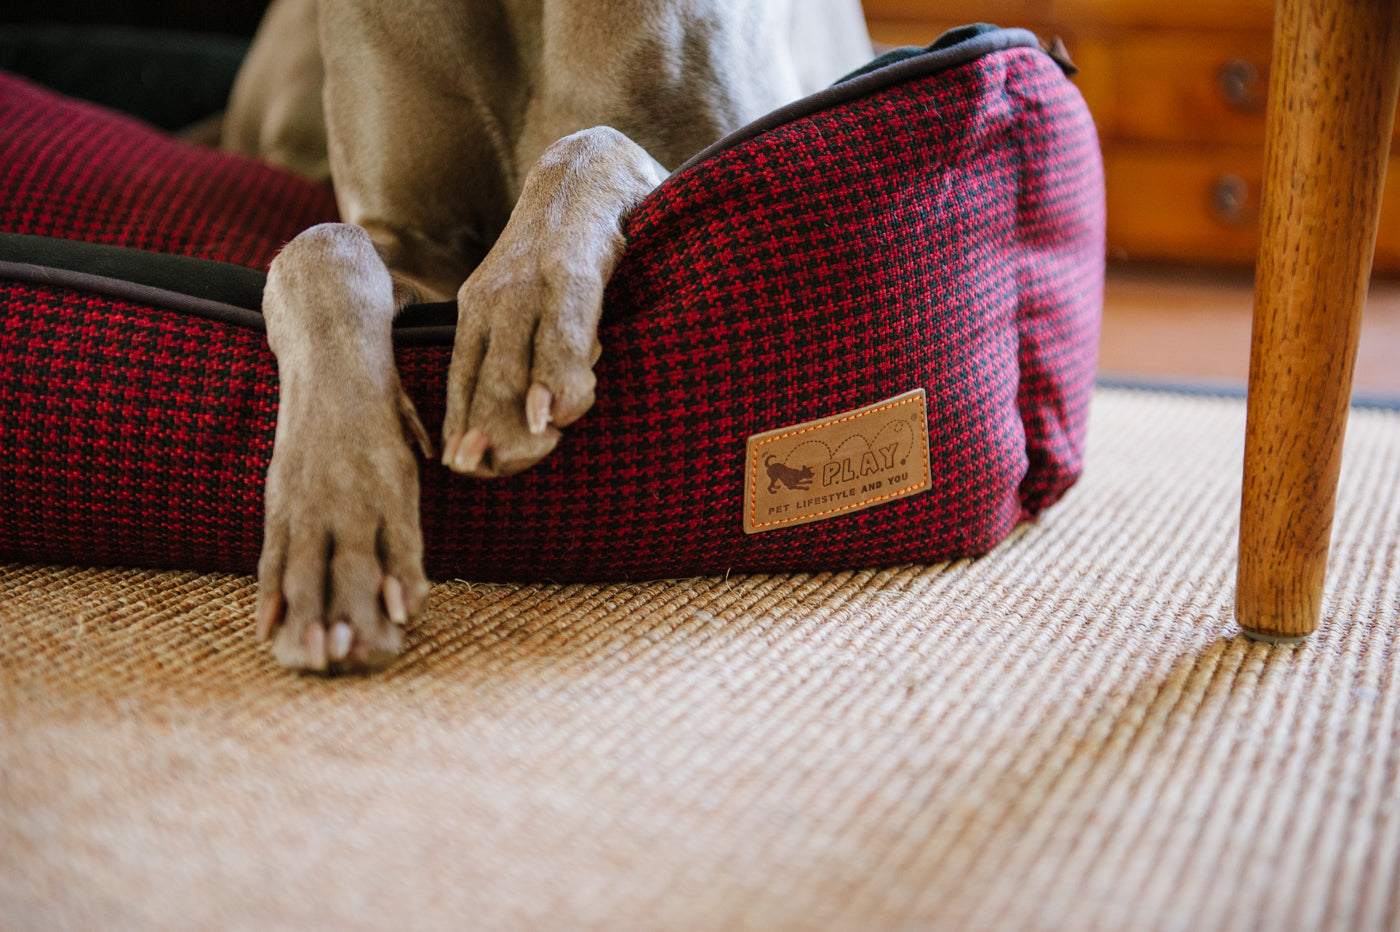 Paws of Weimaraner dog plaiced on the P.L.A.Y. Cayenne Red Hondstooth  Lounge Bed